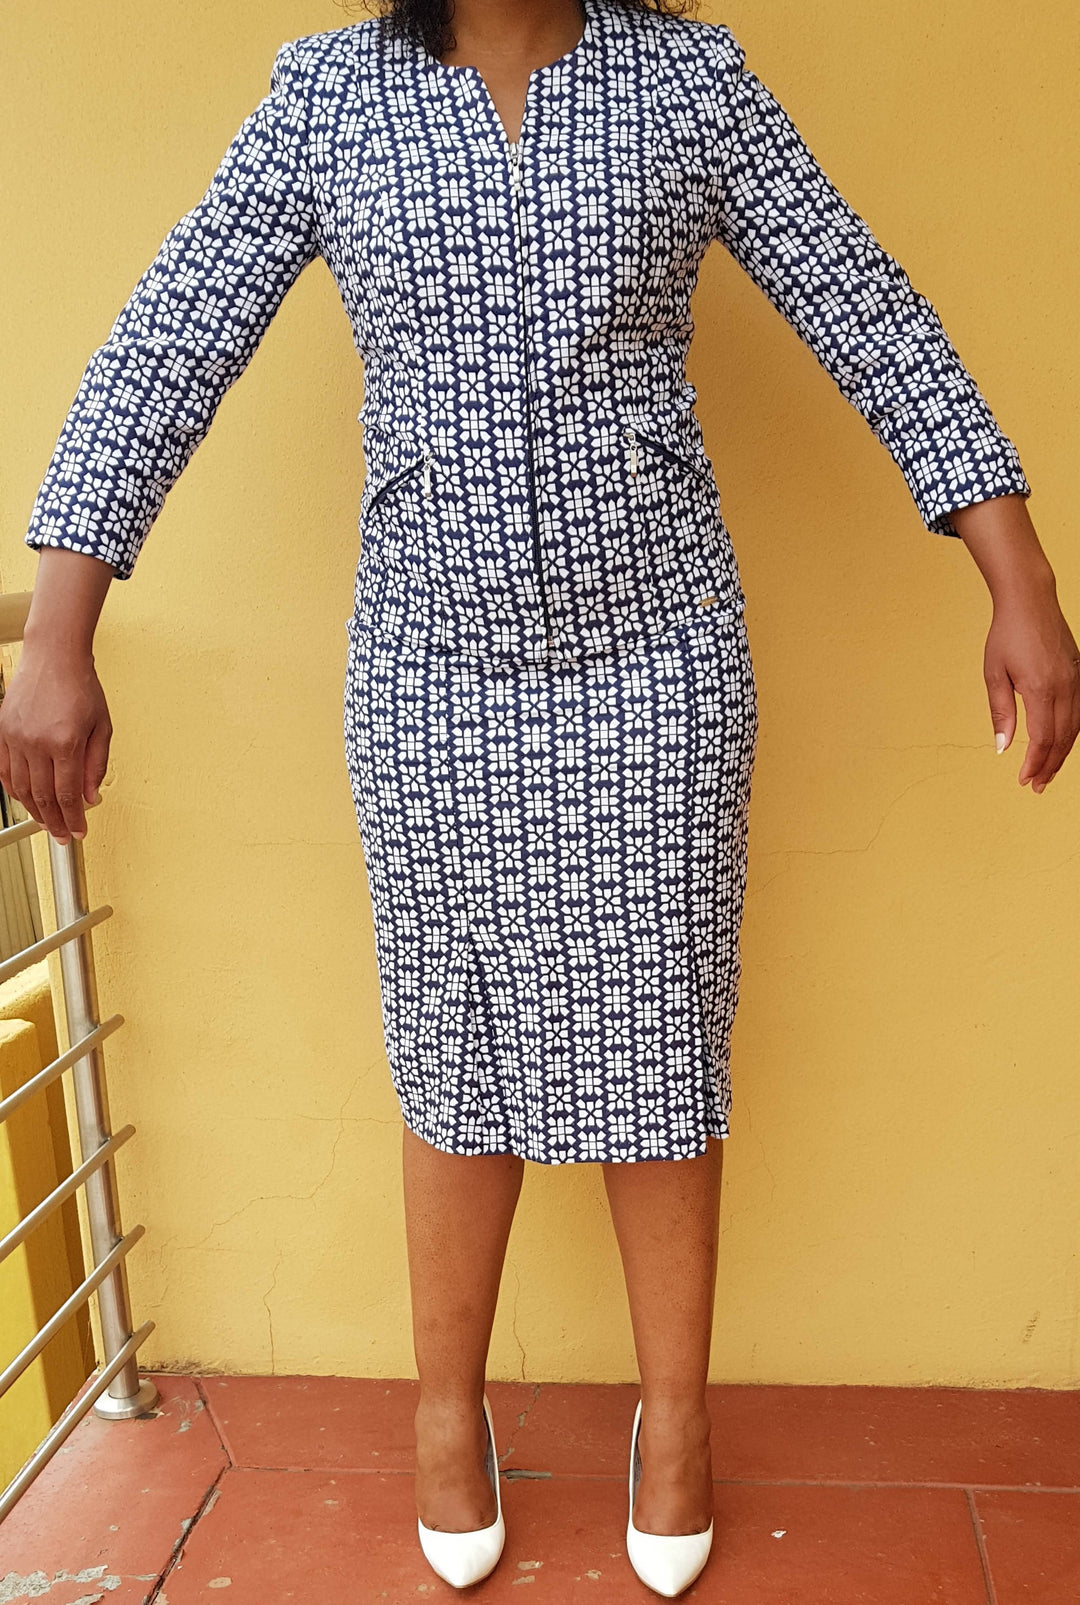 Image of 2 Piece Lady'S Formal Skirt And Jacket